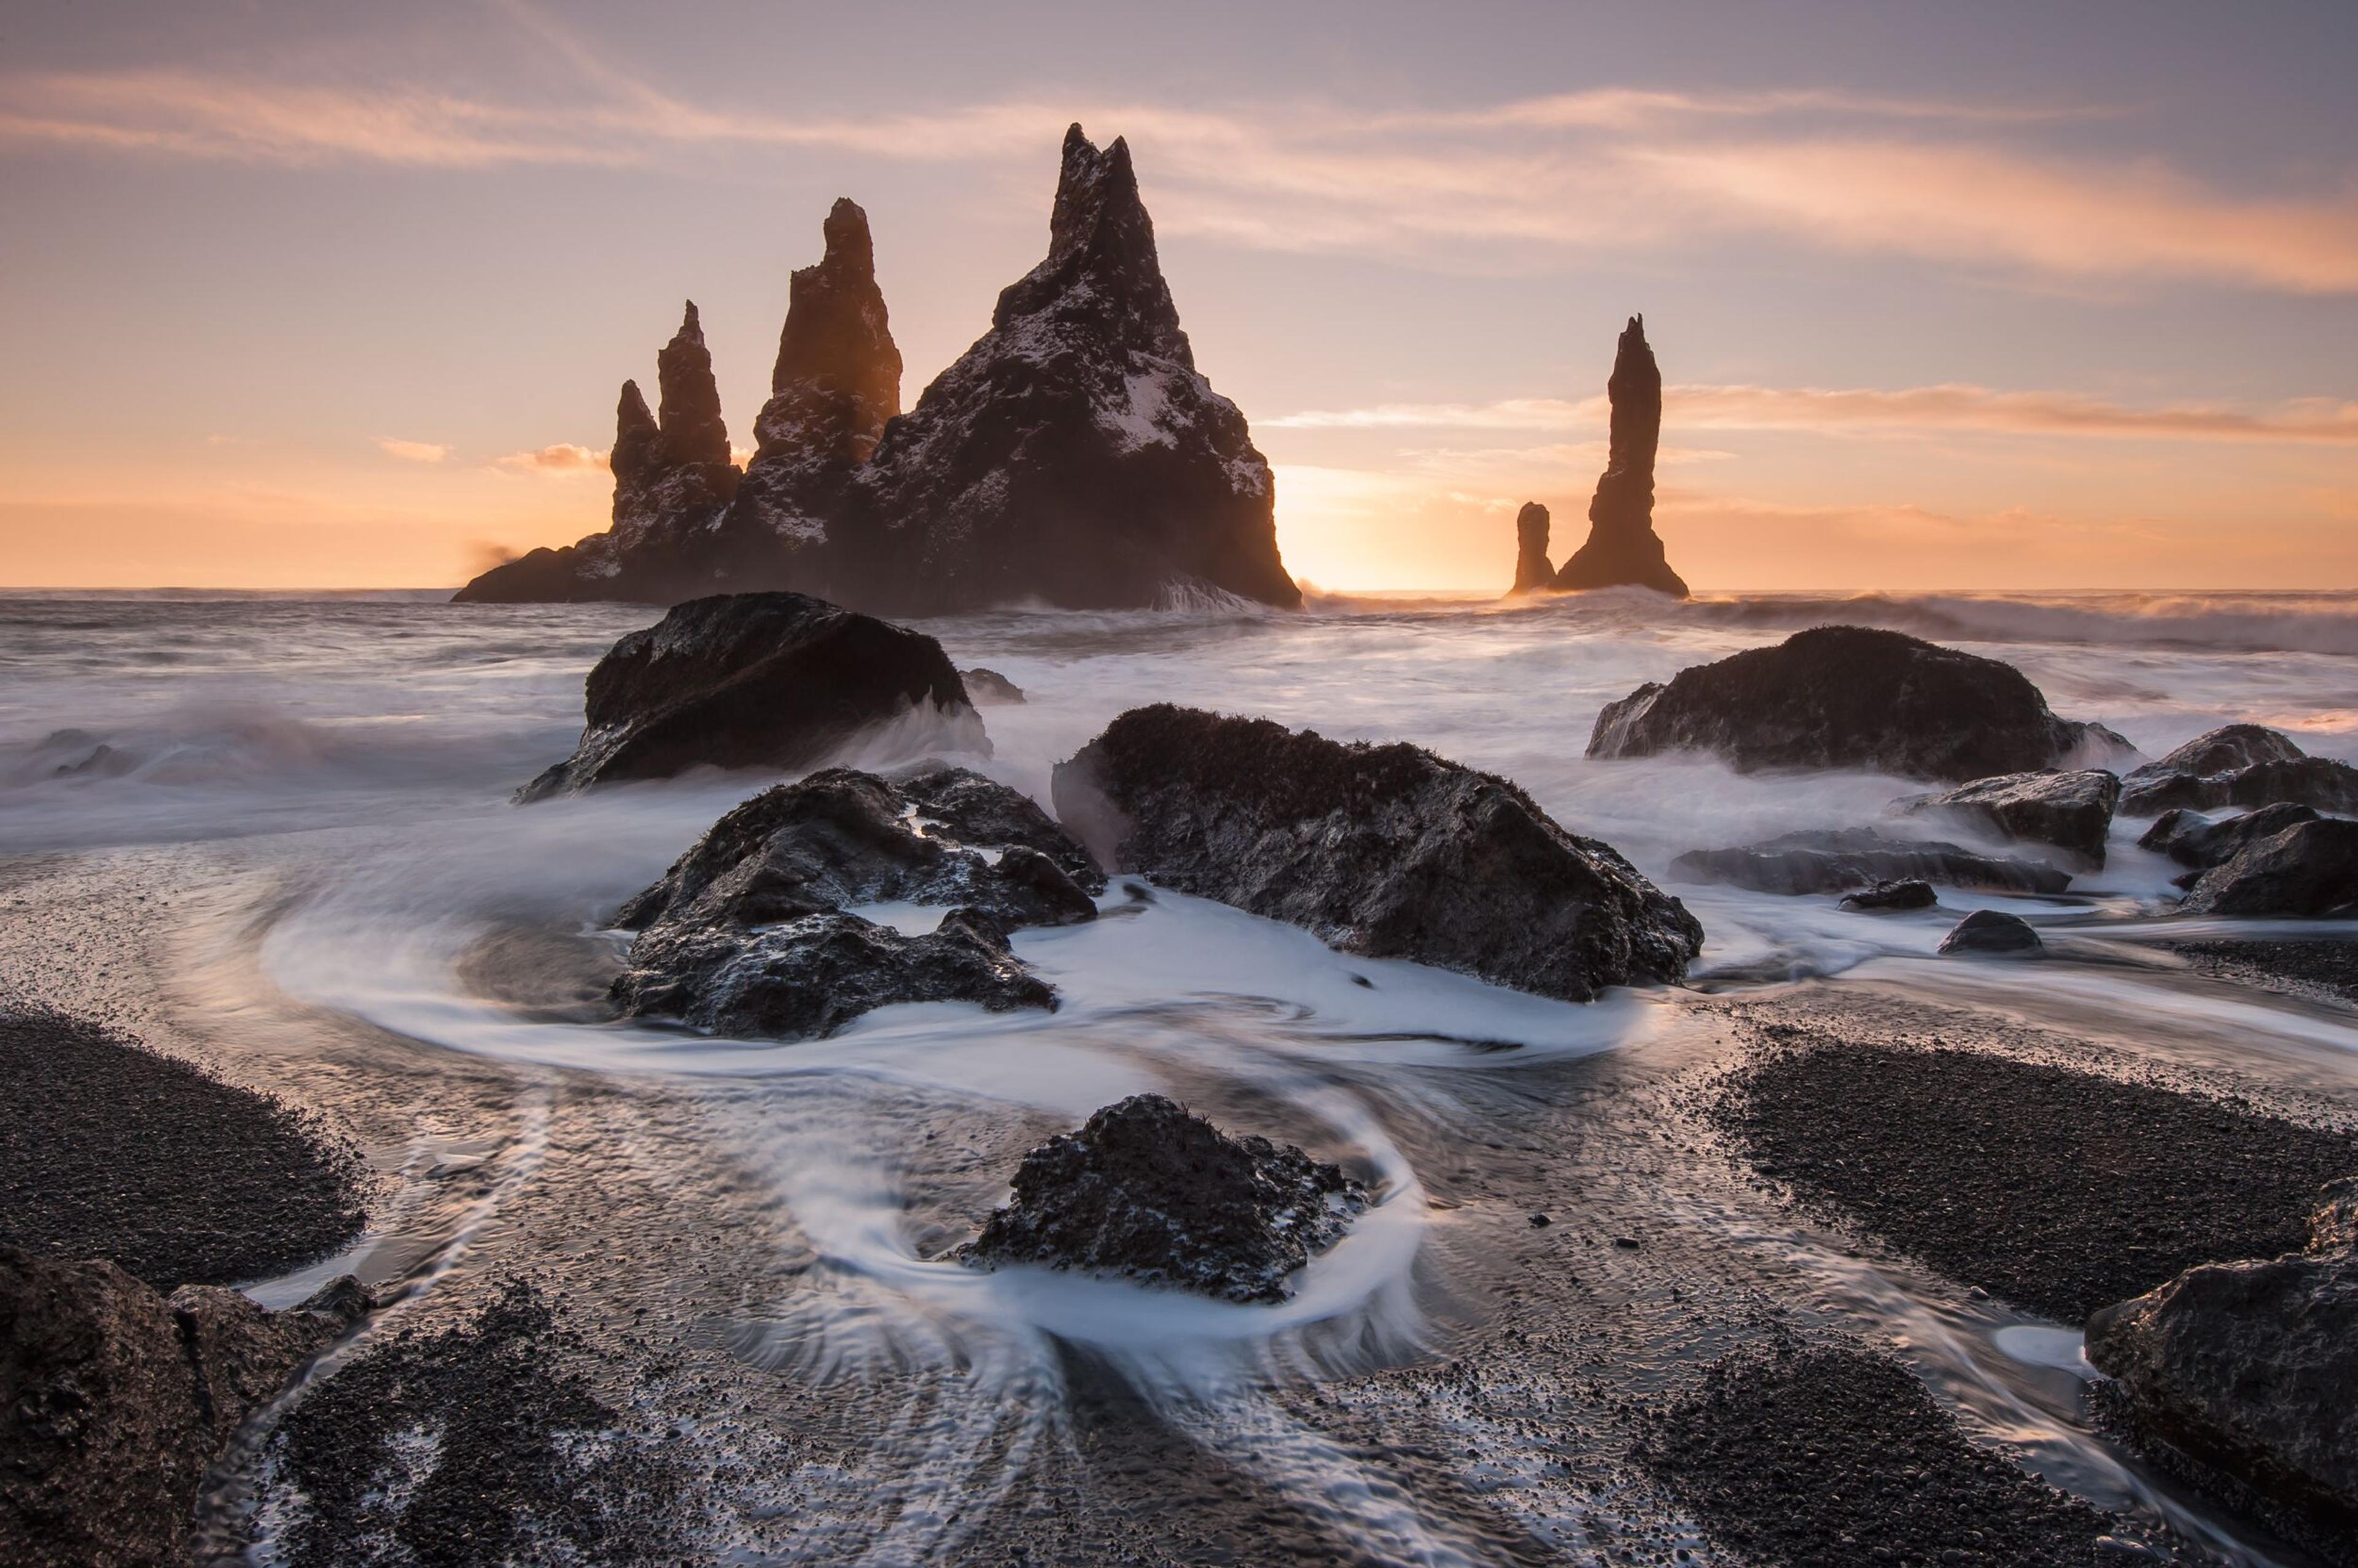 Reynisfjara black sand beach and its rock formations in the south coast of Iceland.